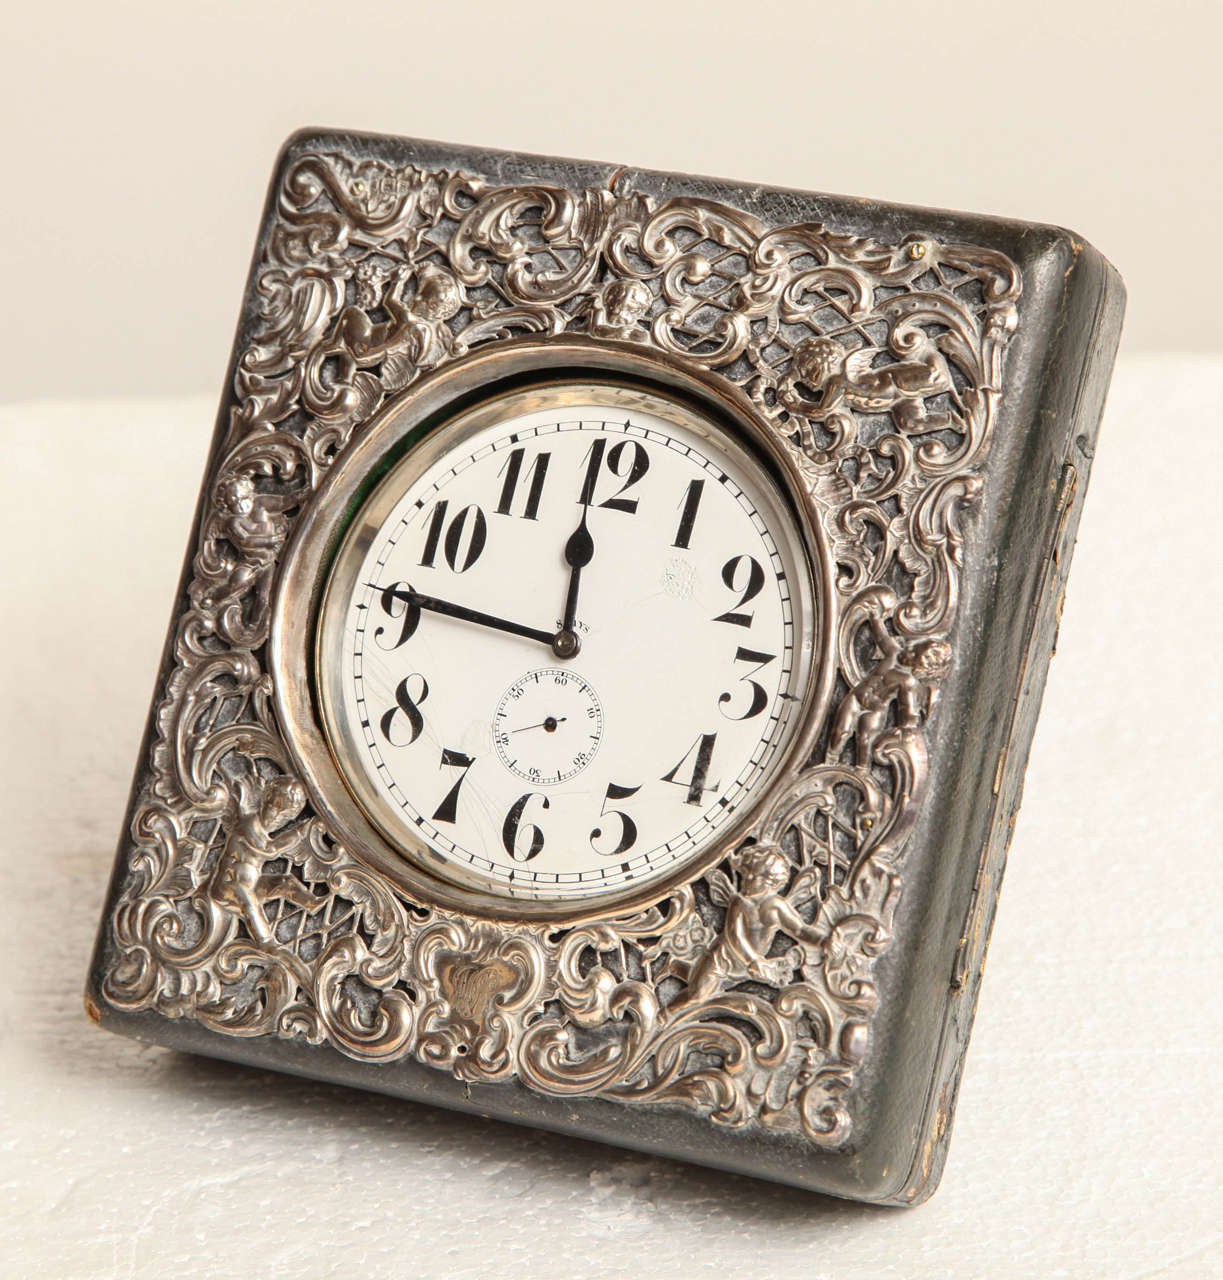 Late 19th Century Swiss Traveling Clock Made for the English Market
Enclosed in a Silver and Leather Case